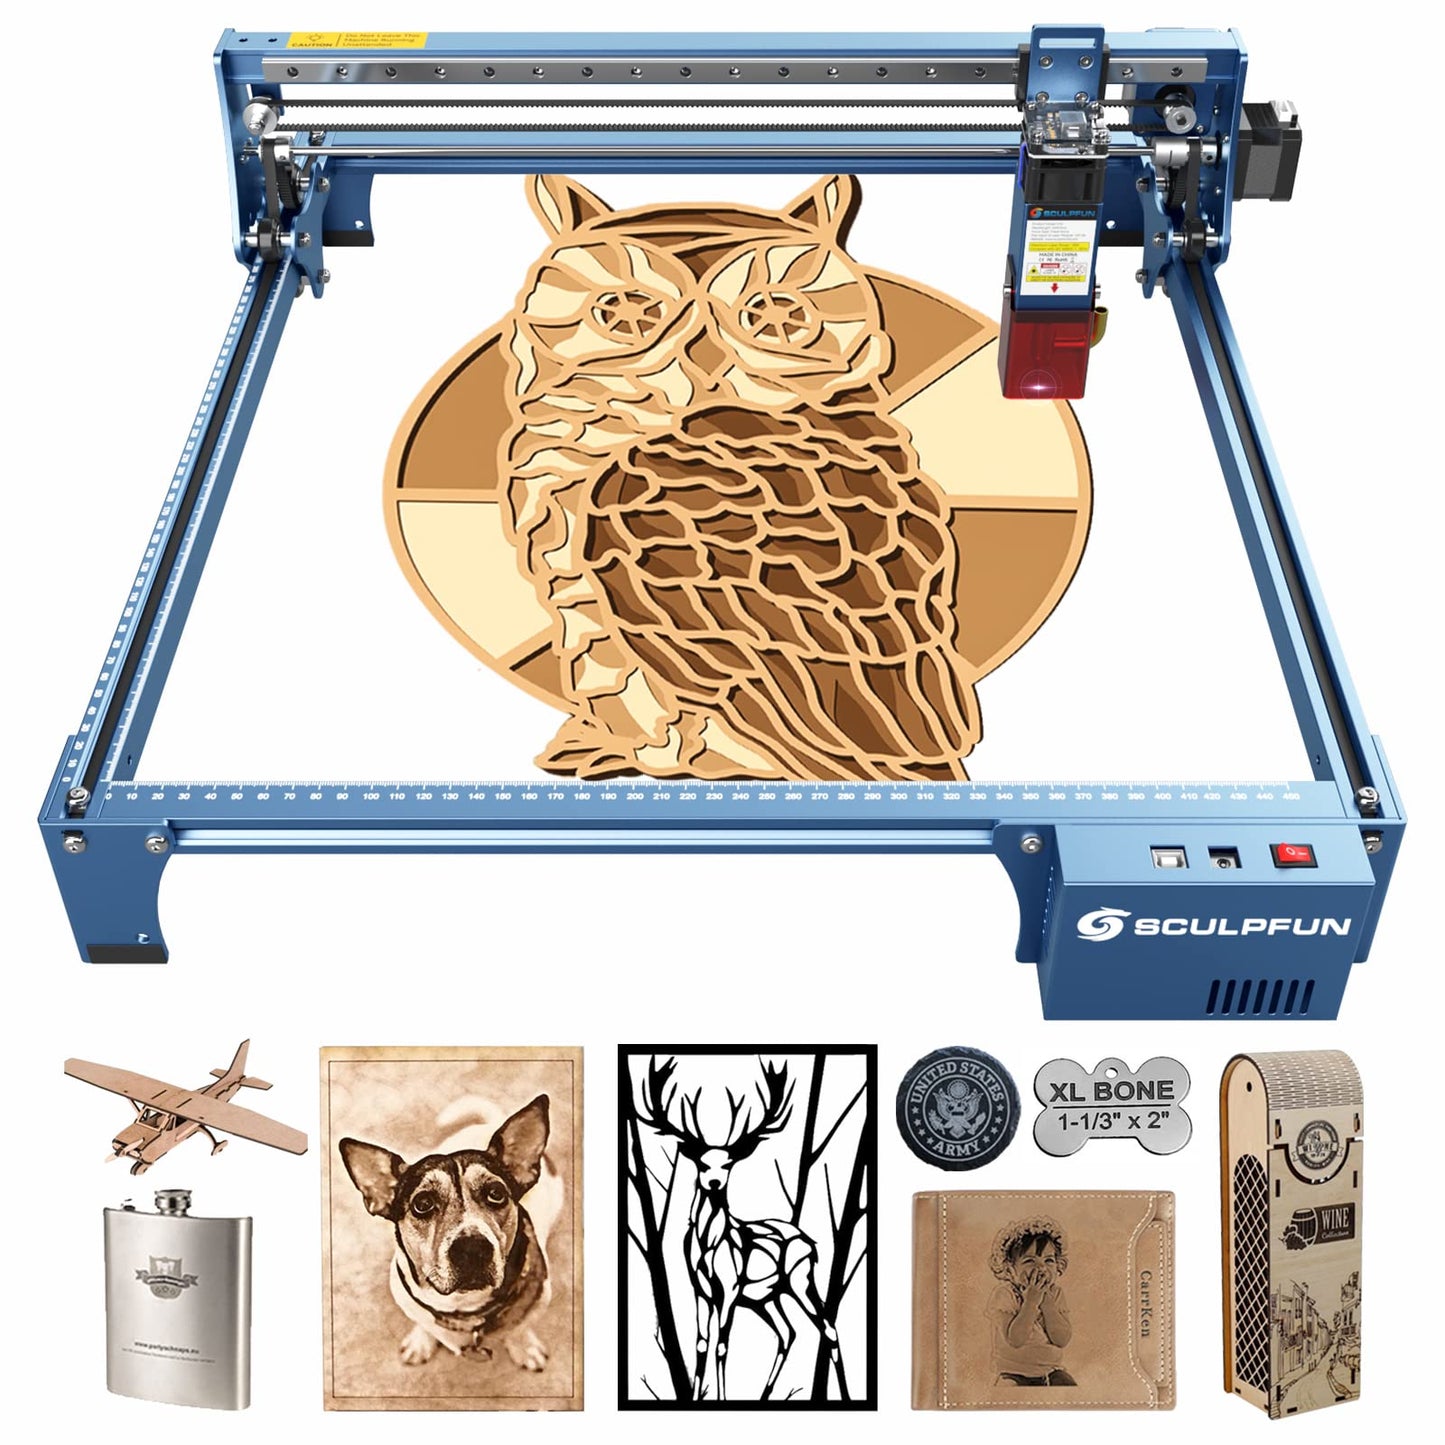 SCULPFUN S10 Laser Engraver, 10W Optical Power Higher Accuracy Laser Cutter Engraving Machine with Industrial X-axis Linear Slide Rail and Air Assist